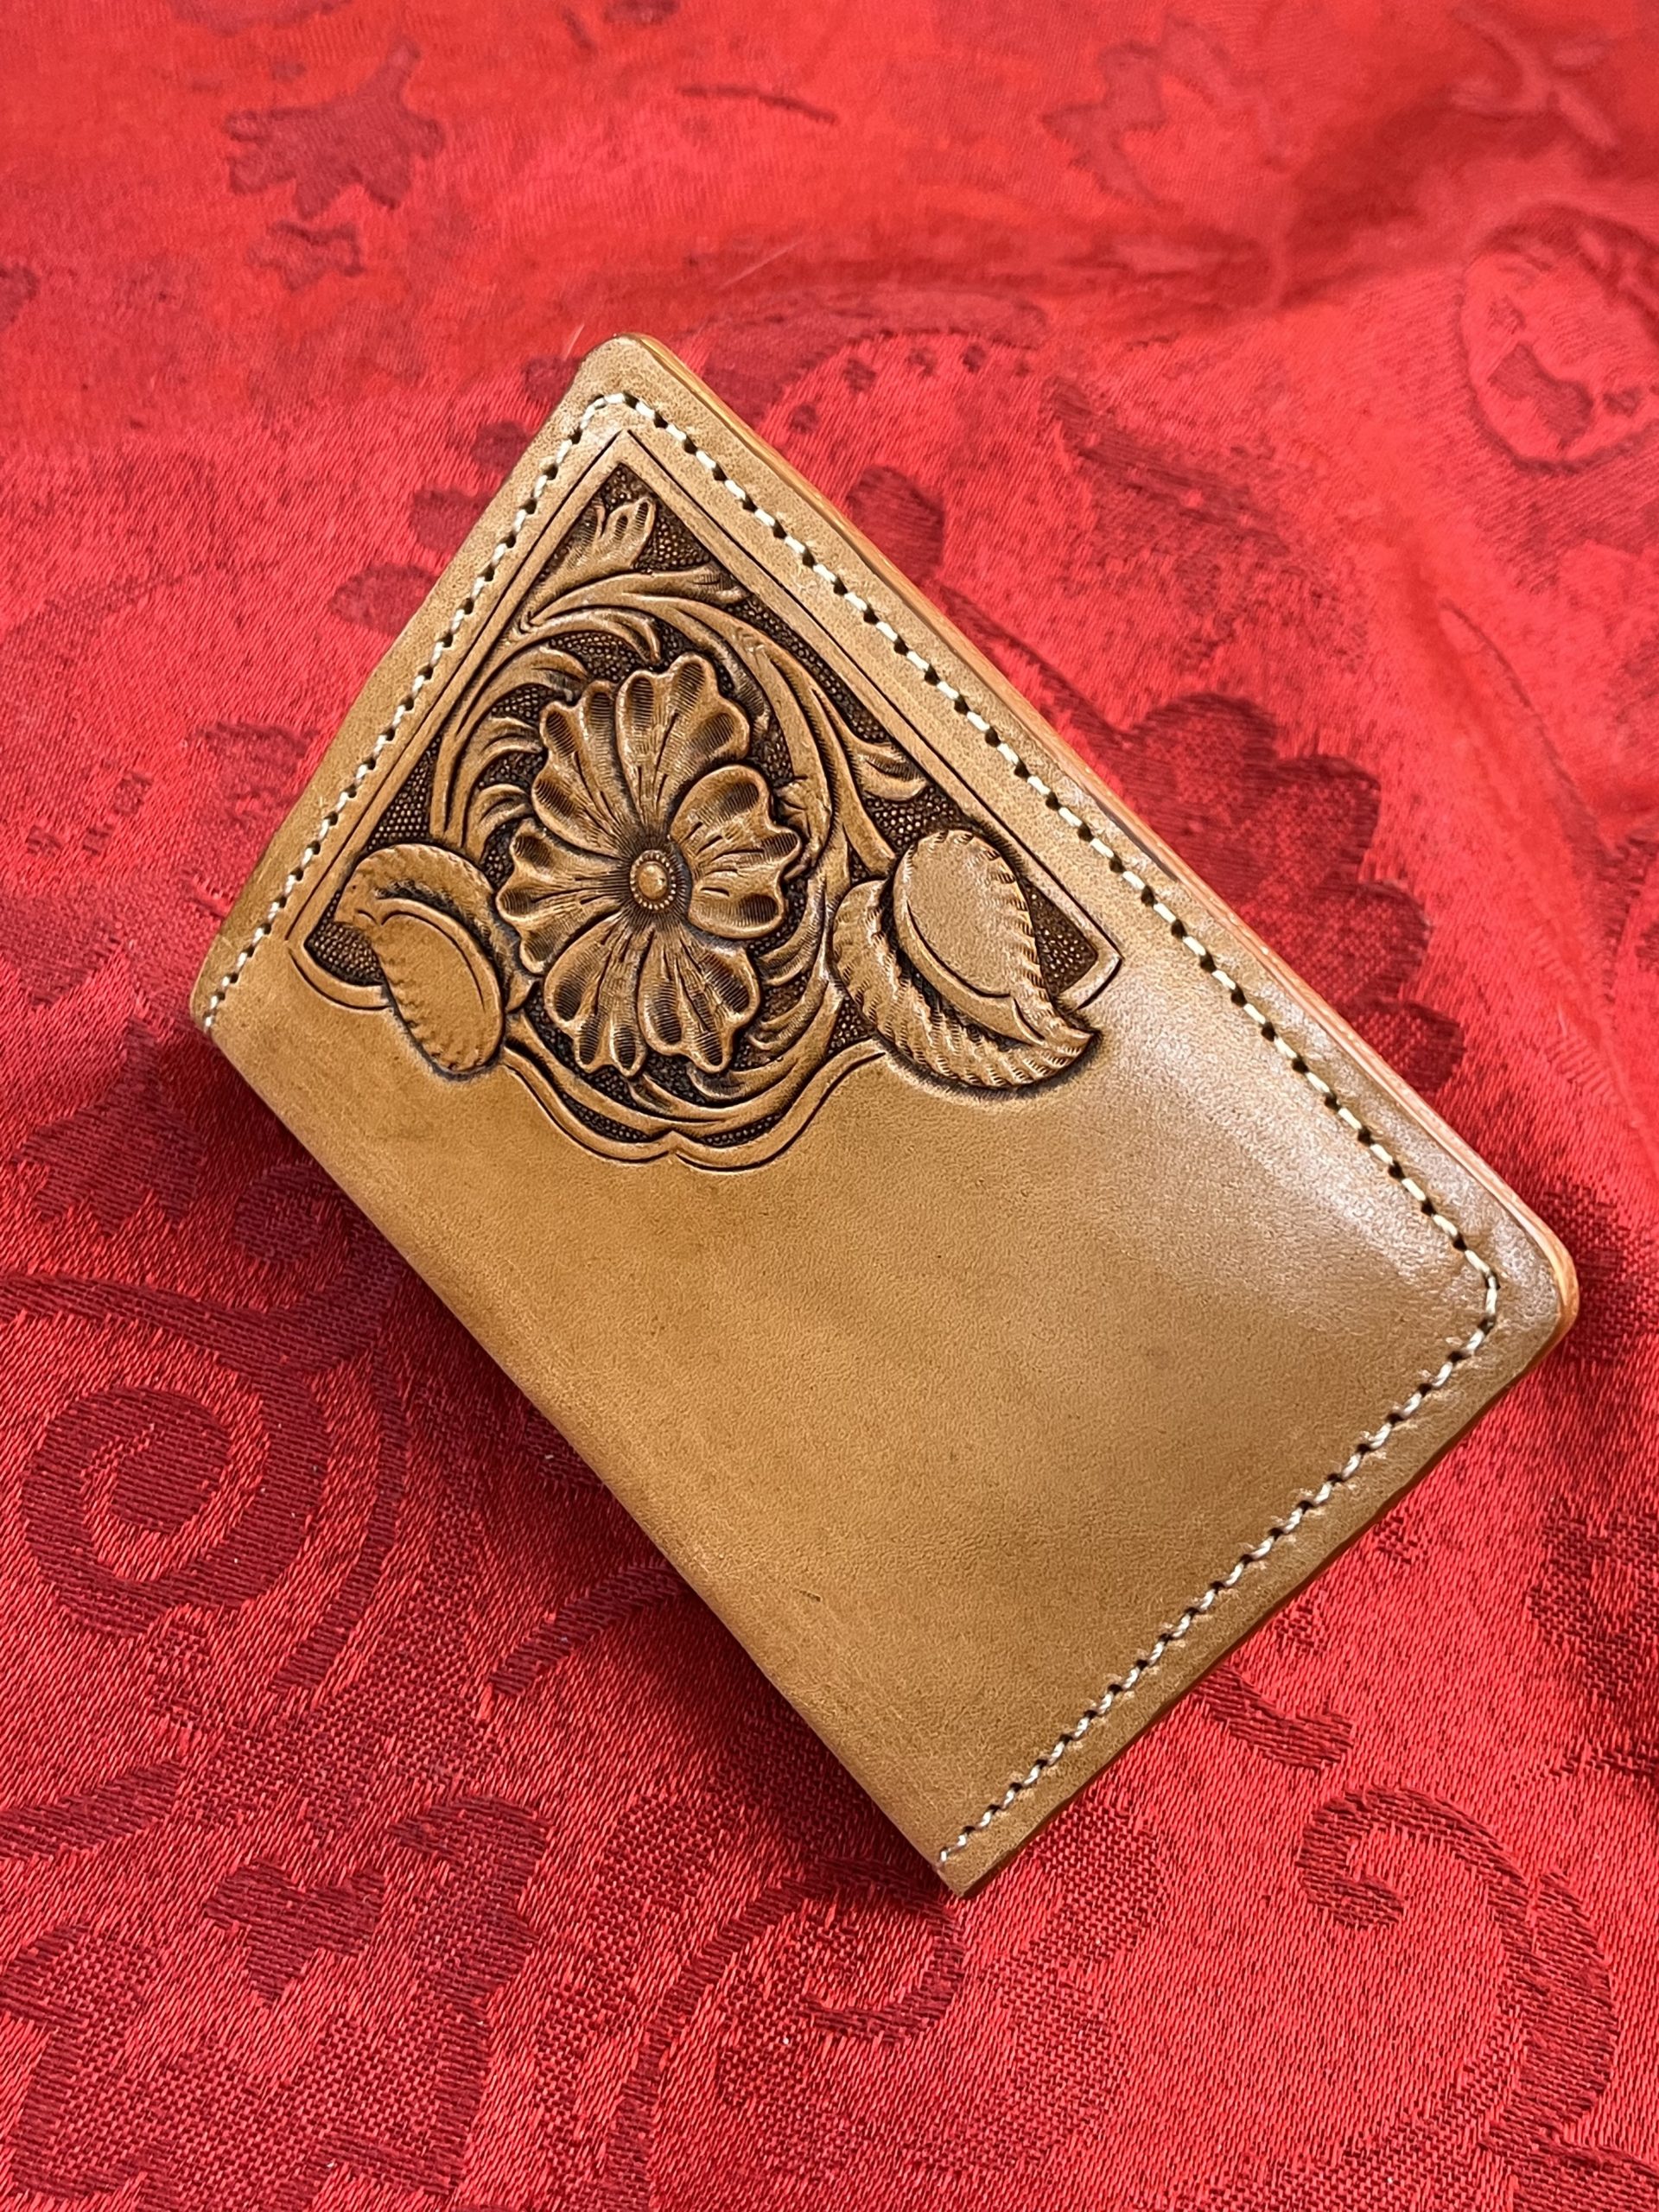 PDF Leather Tooling / Carving Pattern. Handmade Leather Journal